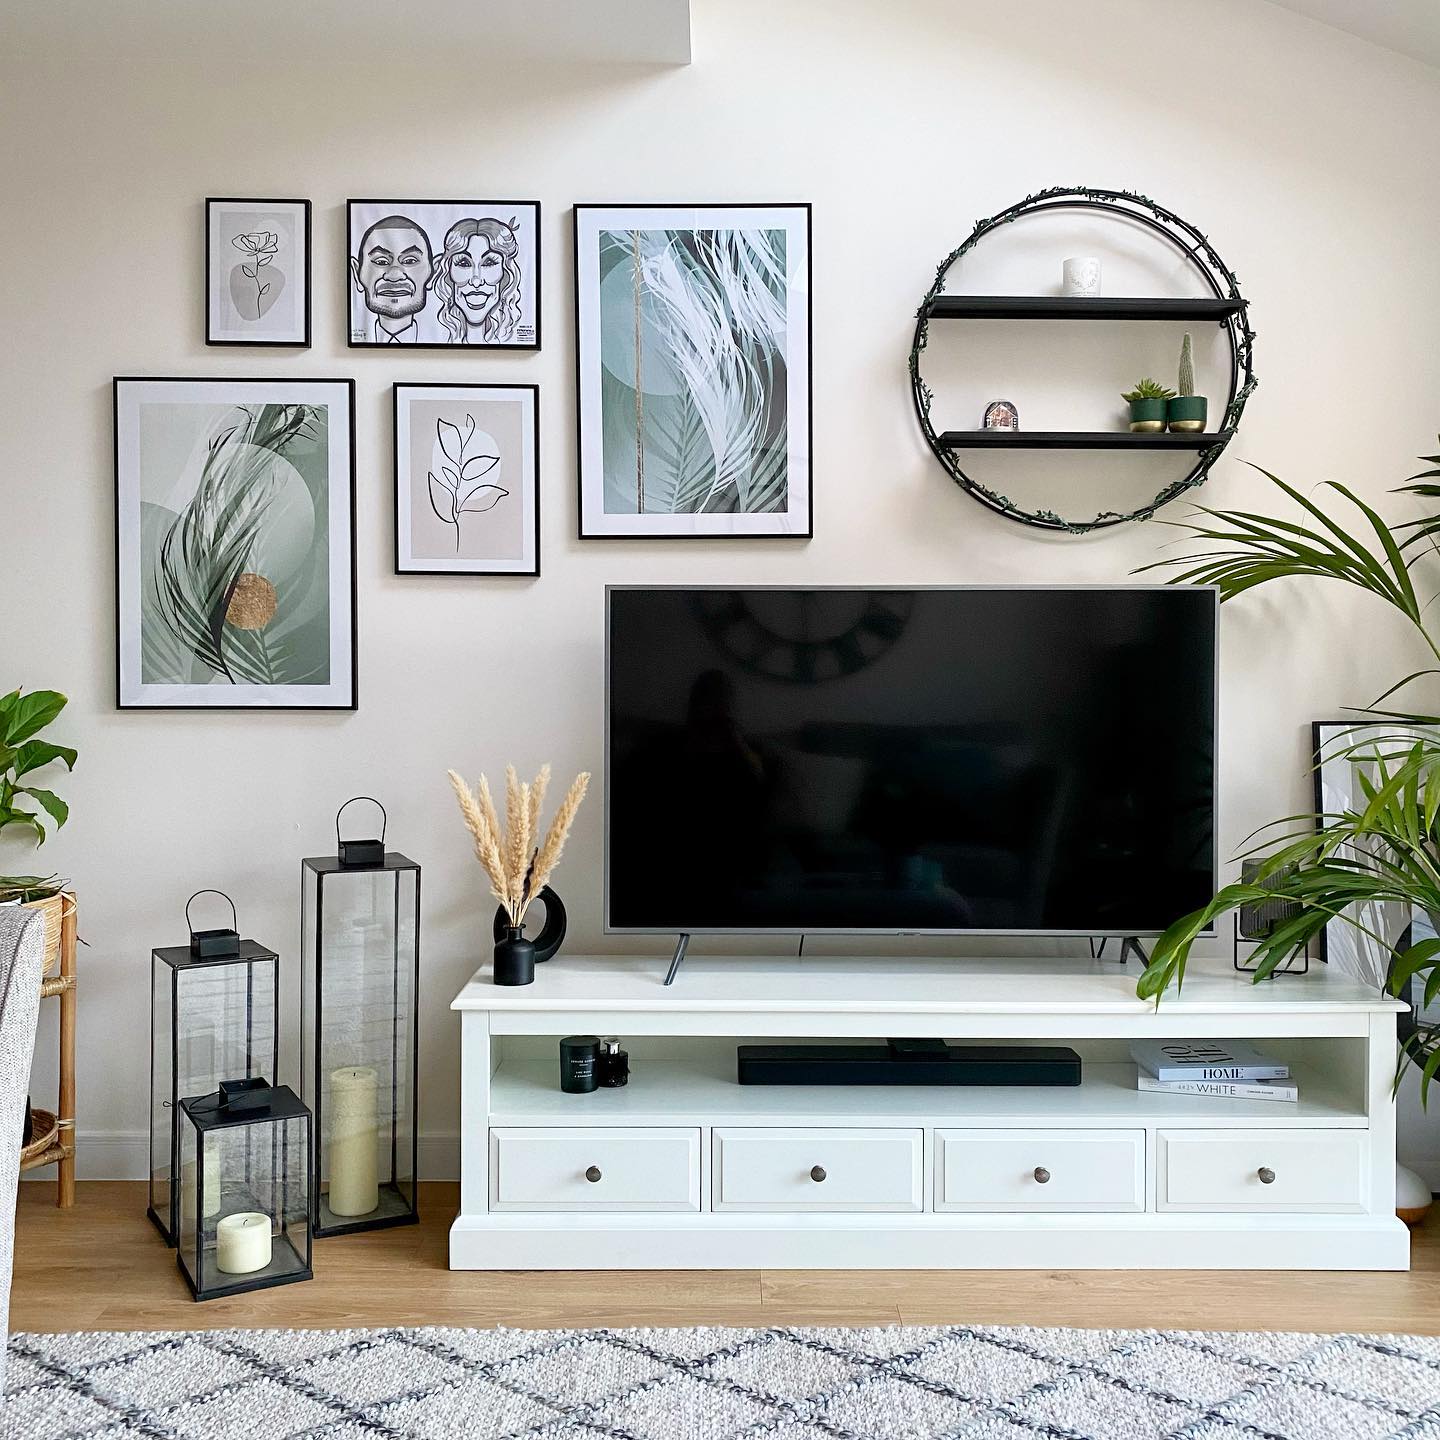 TV stand with hanging wall art and circle shelving. Photo by Instagram user @luxfordinteriors